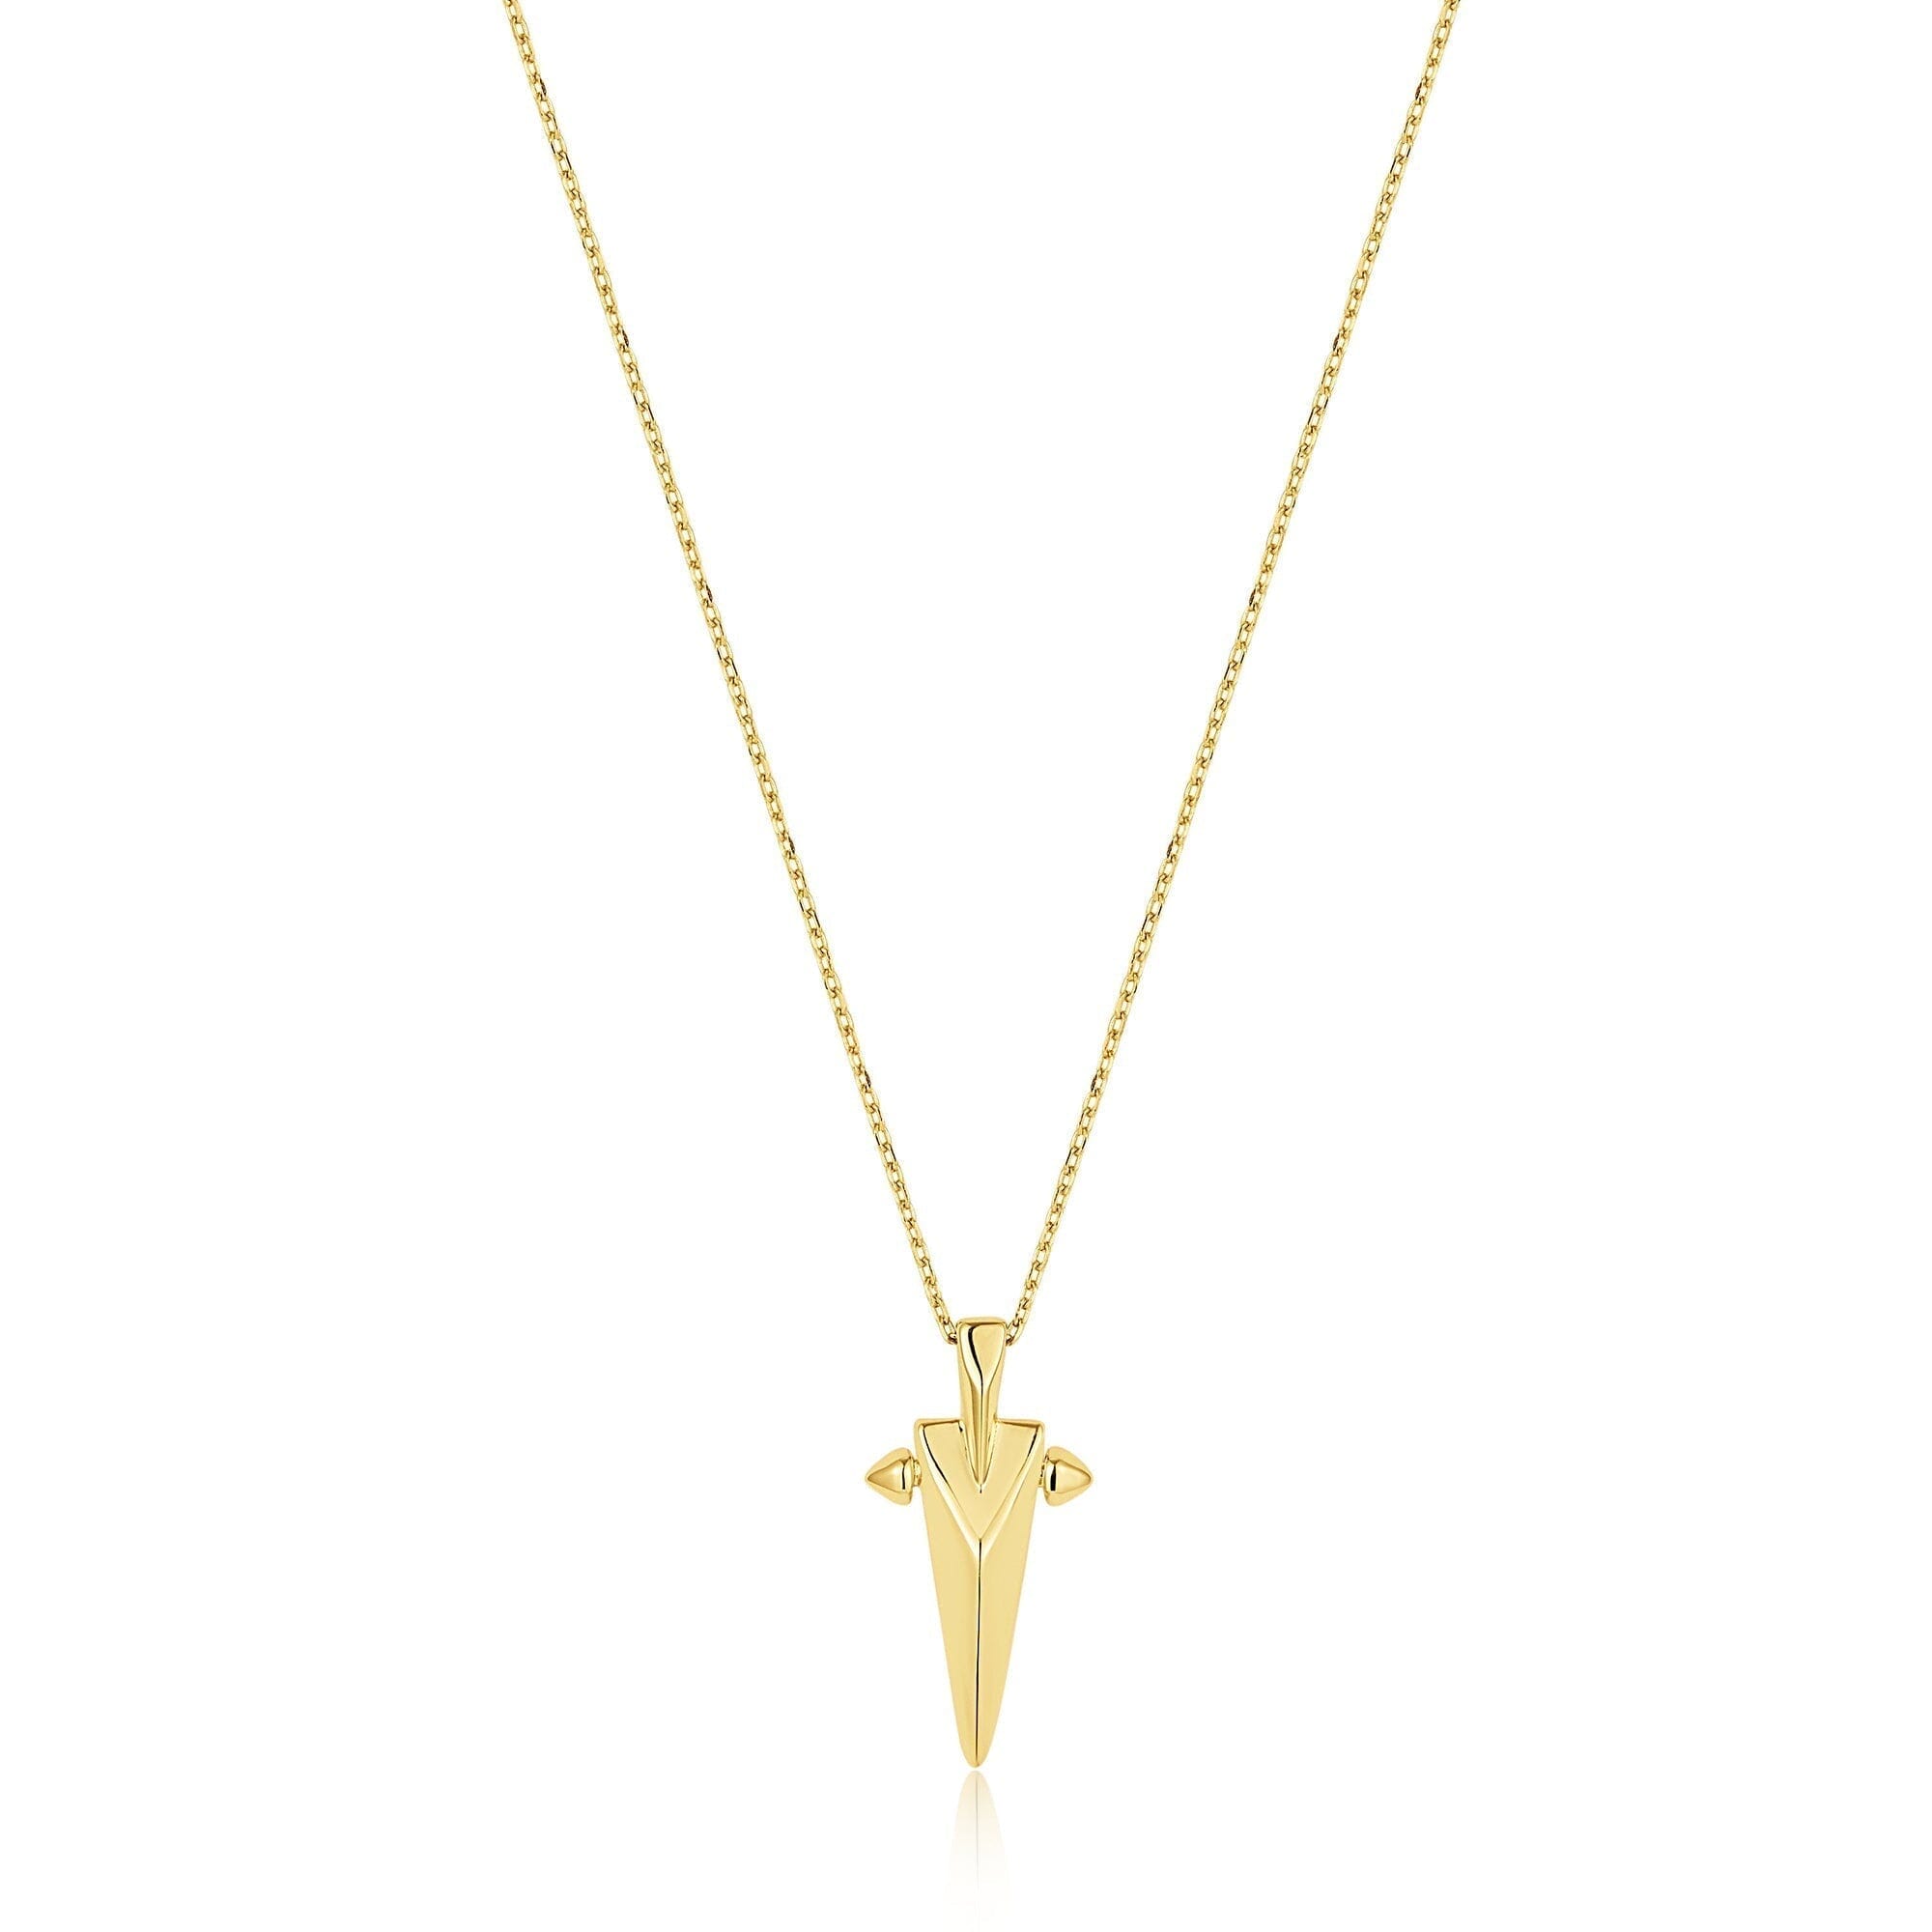 Ania Haie Gold Geometric Point Pendant Necklaces Necklaces Ania Haie 